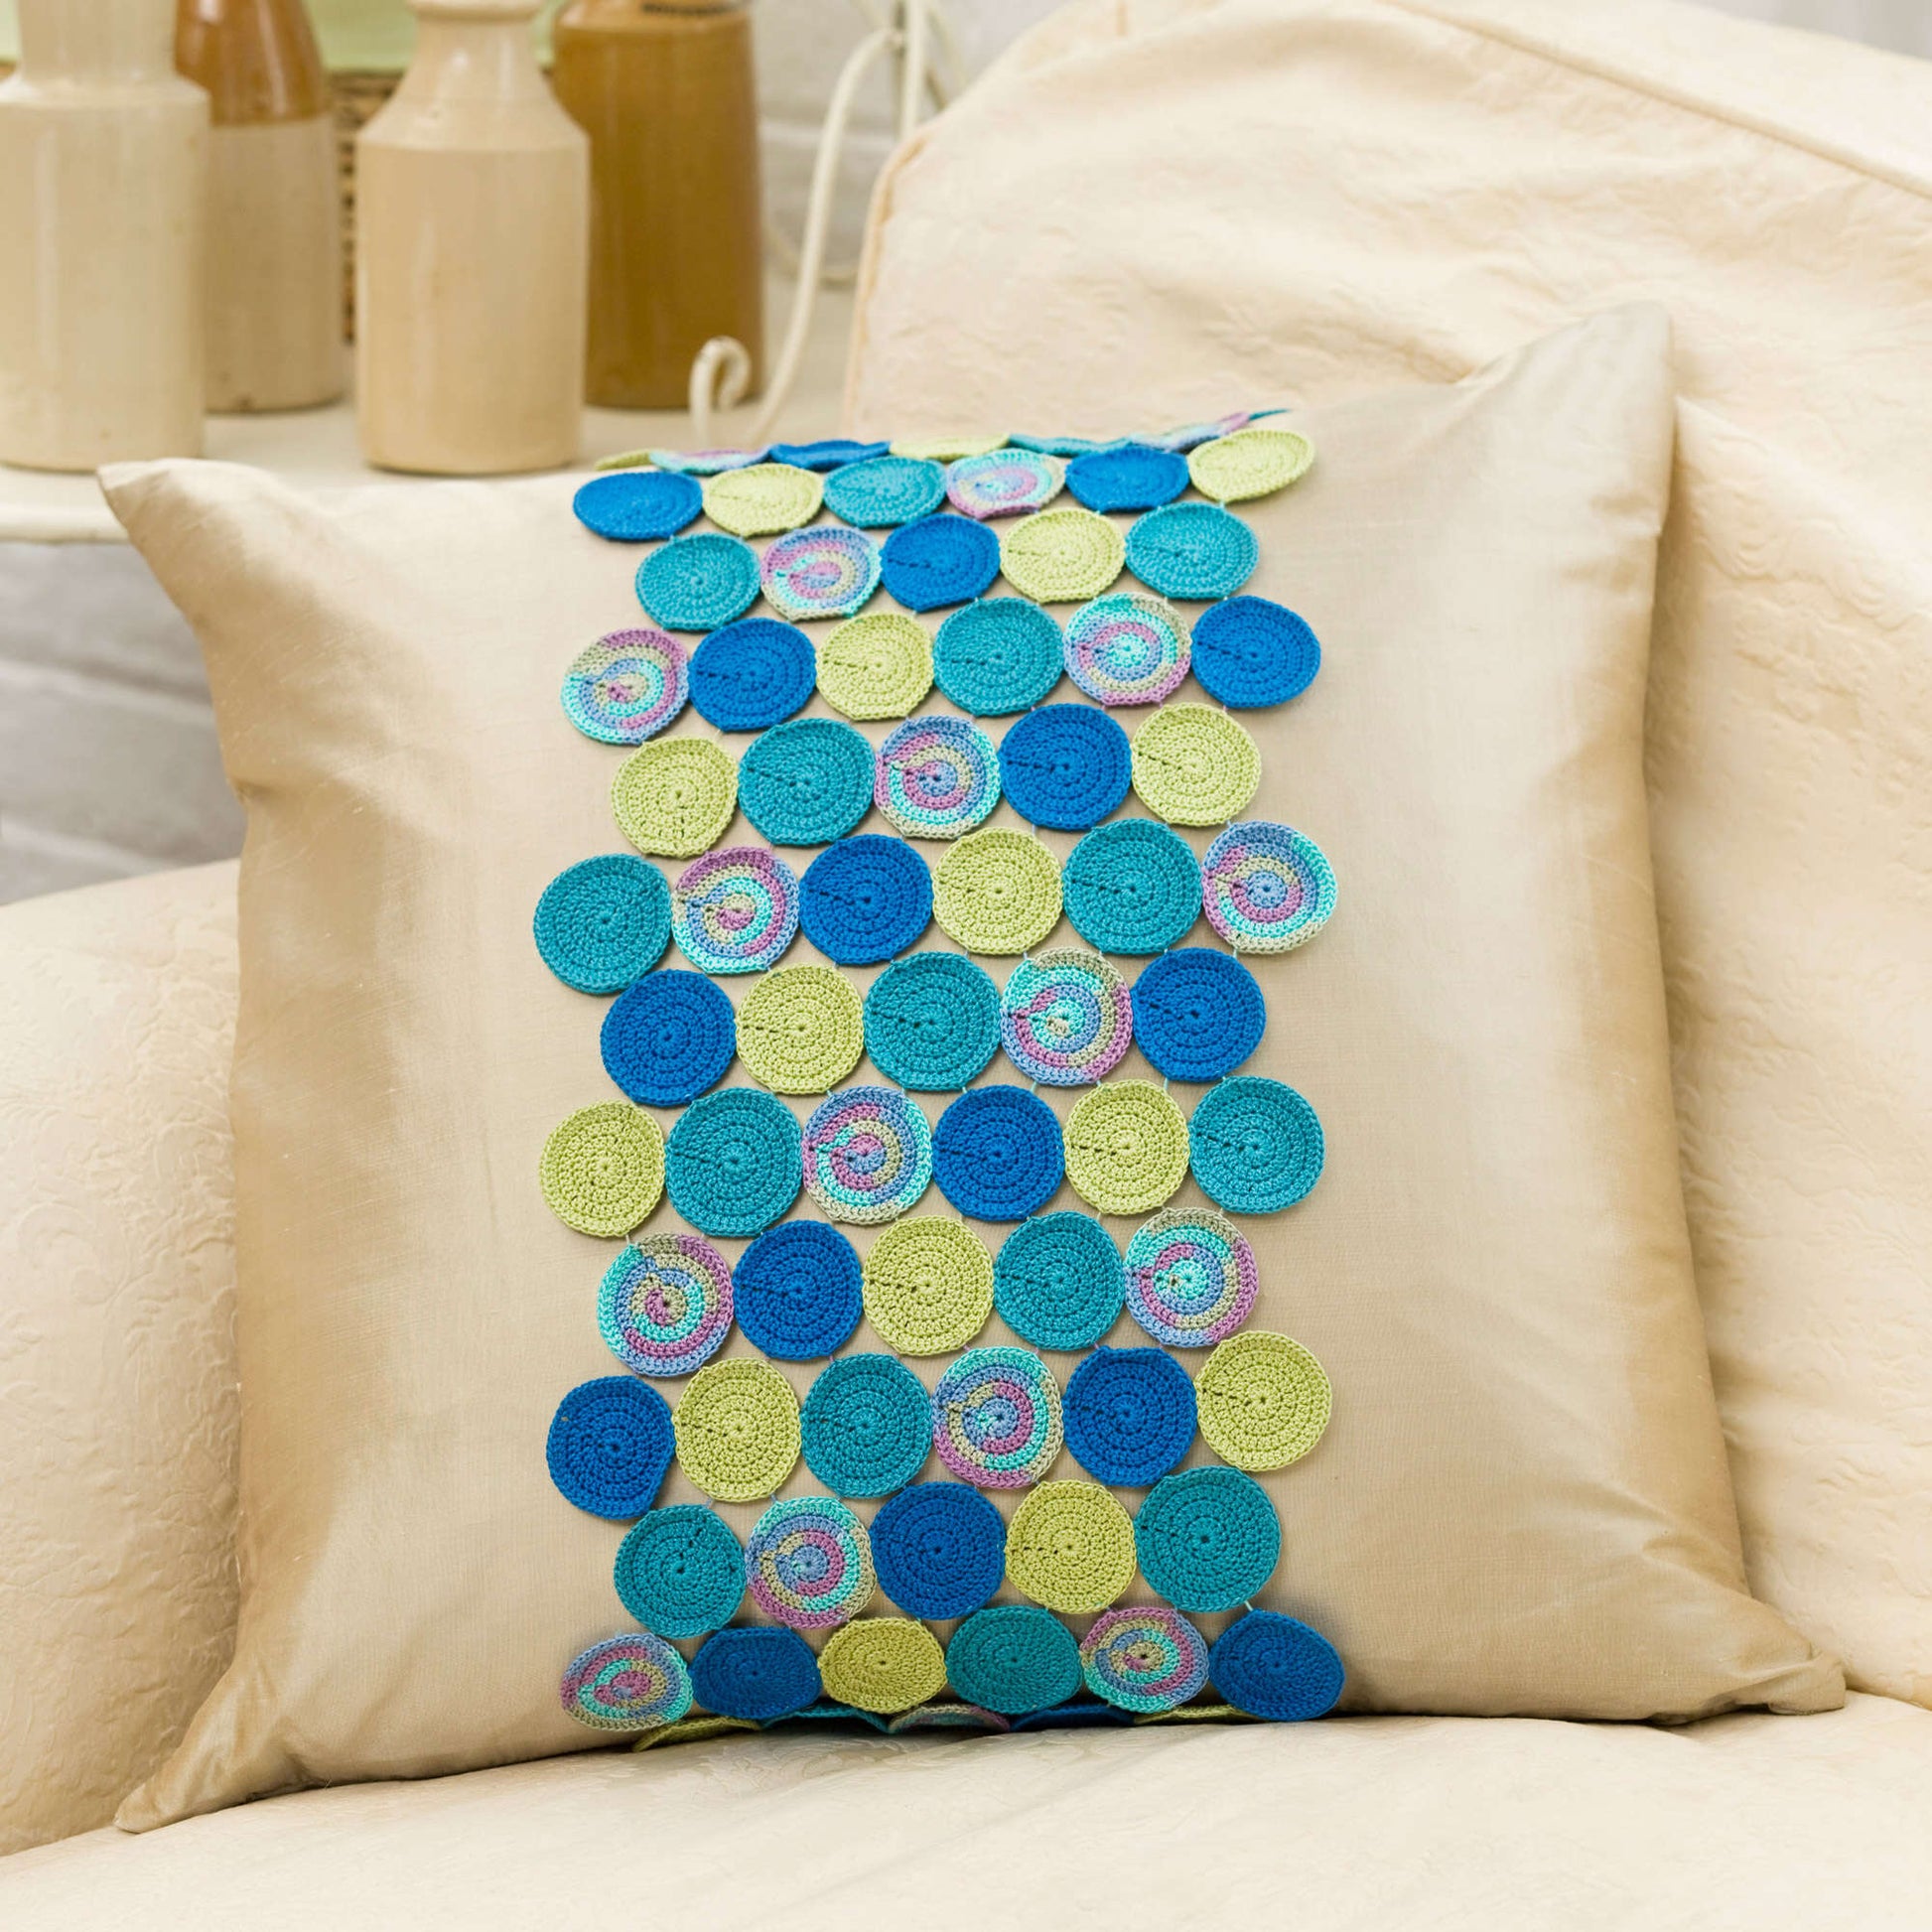 Free Aunt Lydia's Circling Accent Pillow Crochet Pattern